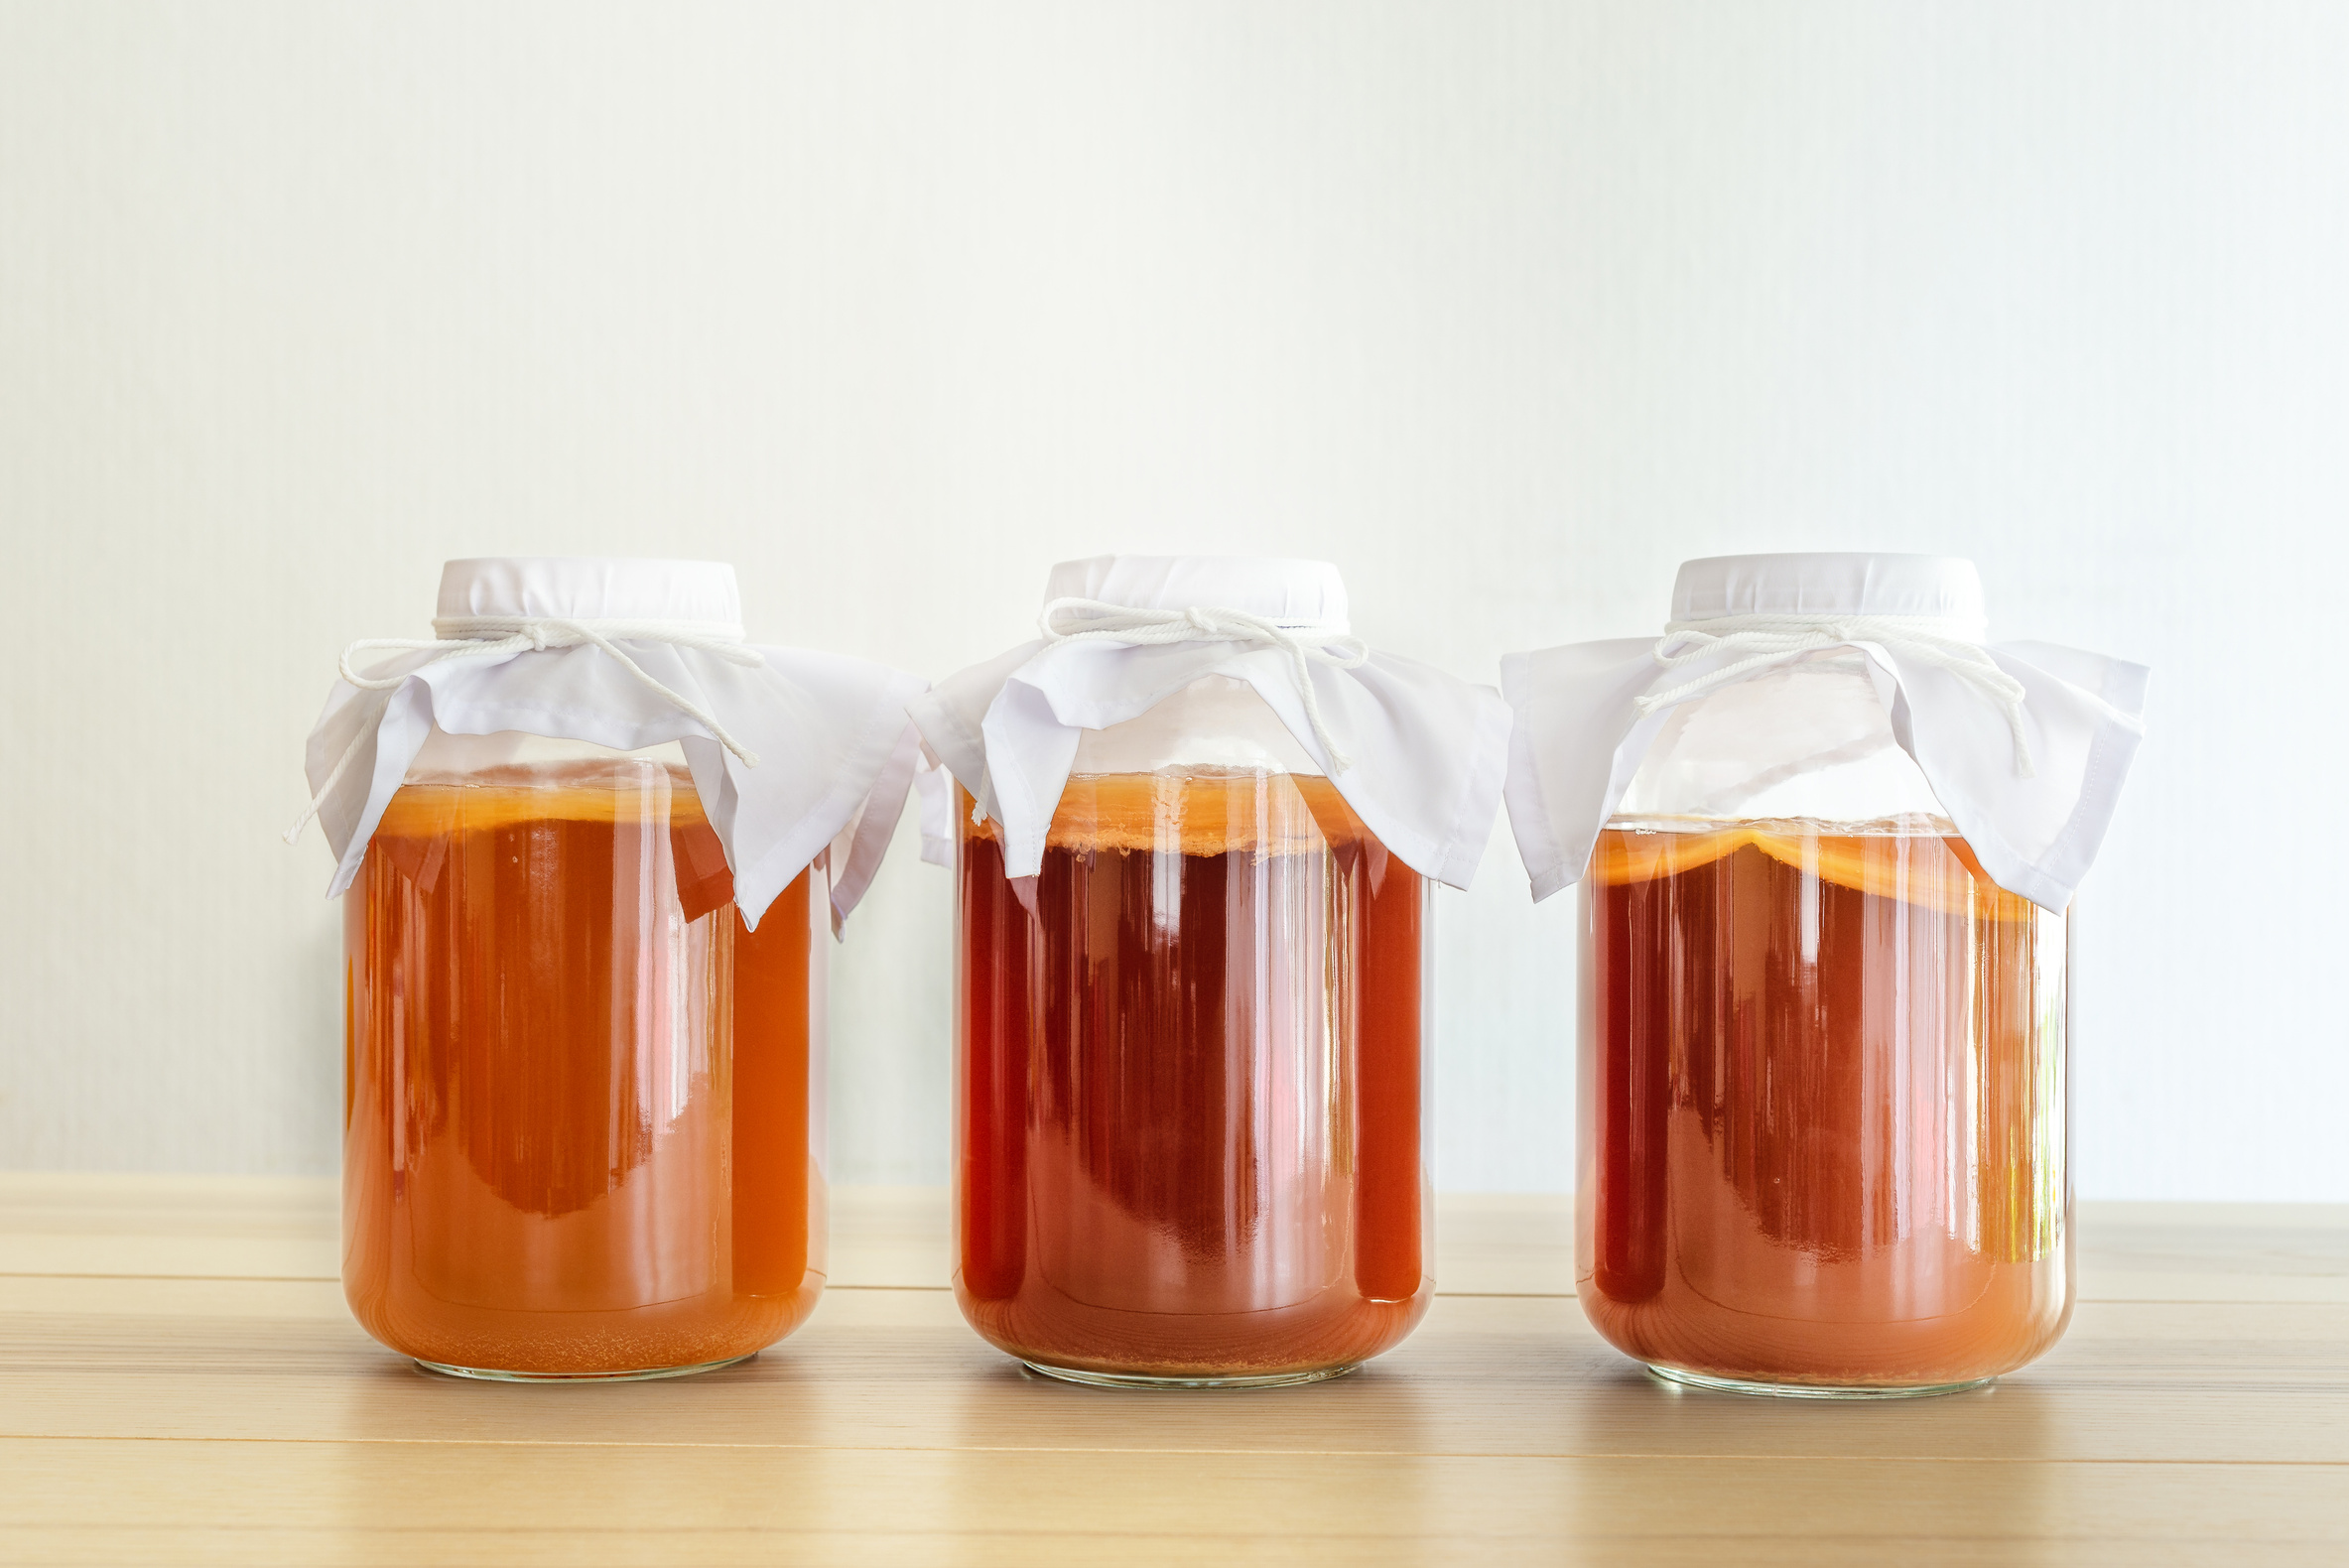 homemade fermented drink Kombucha SCOBY "symbiotic culture of bacteria and yeast"